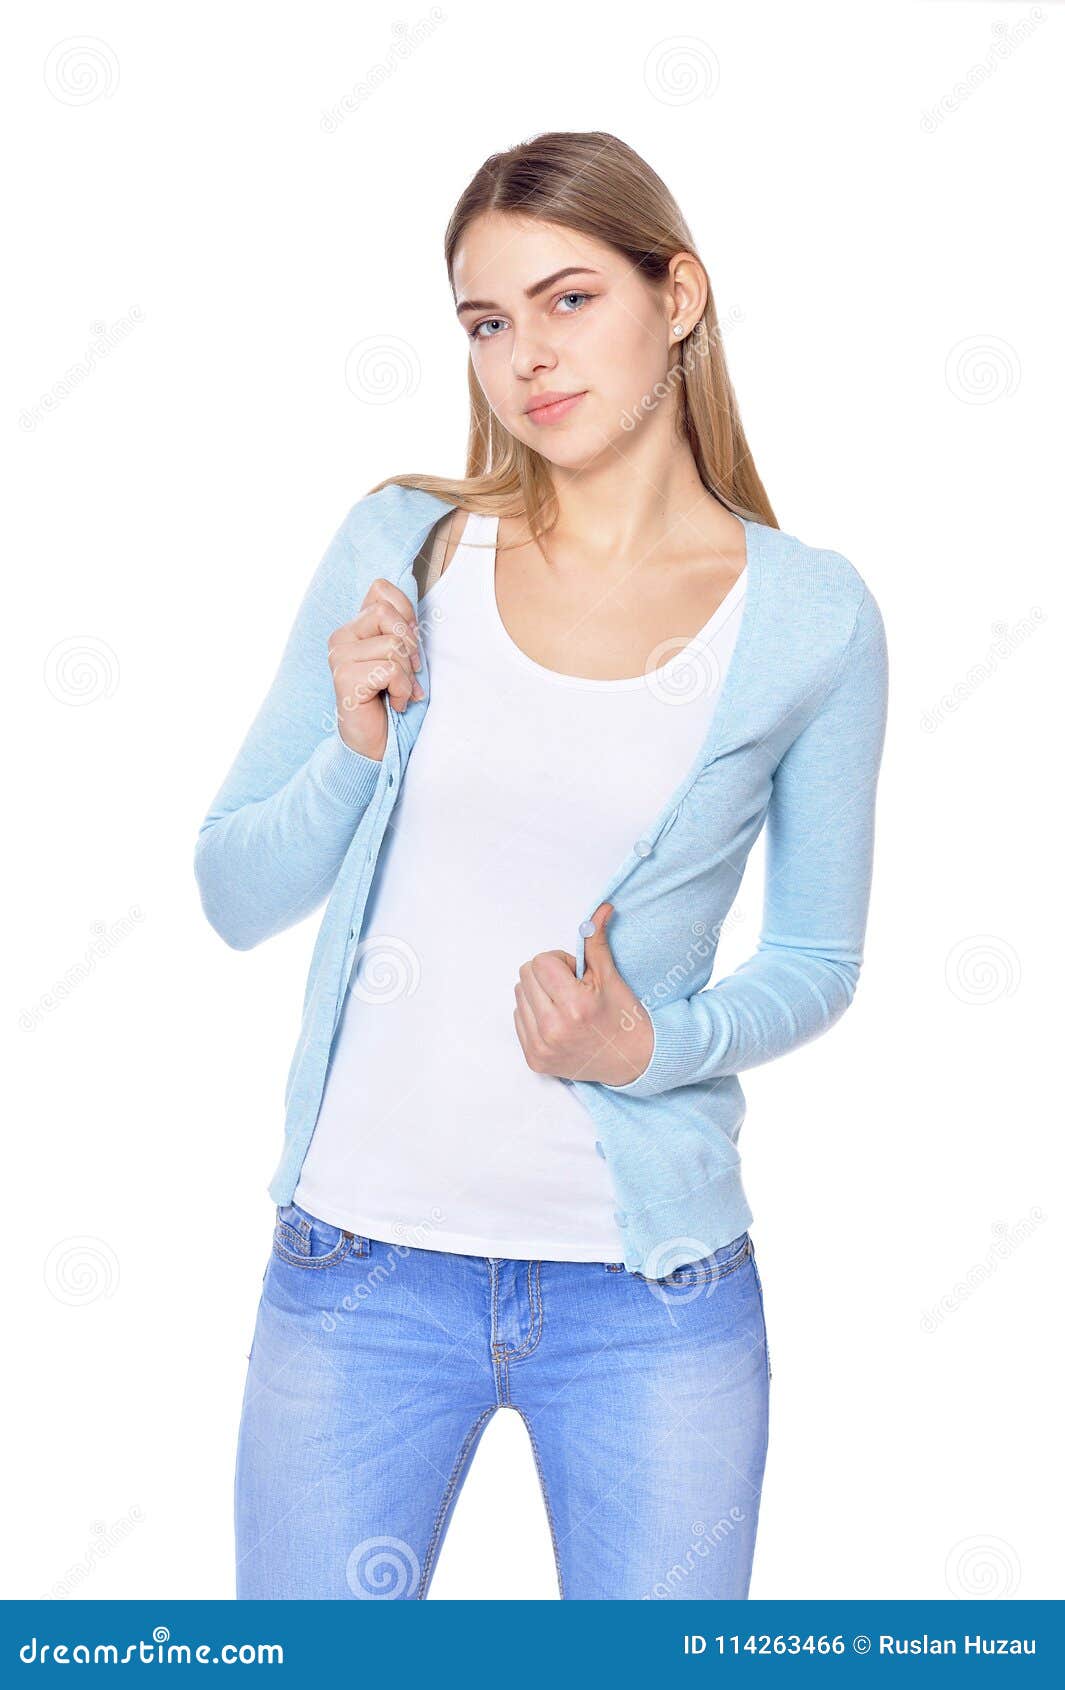 Beautiful Woman in Jeans Posing Stock Photo - Image of cold, femme ...